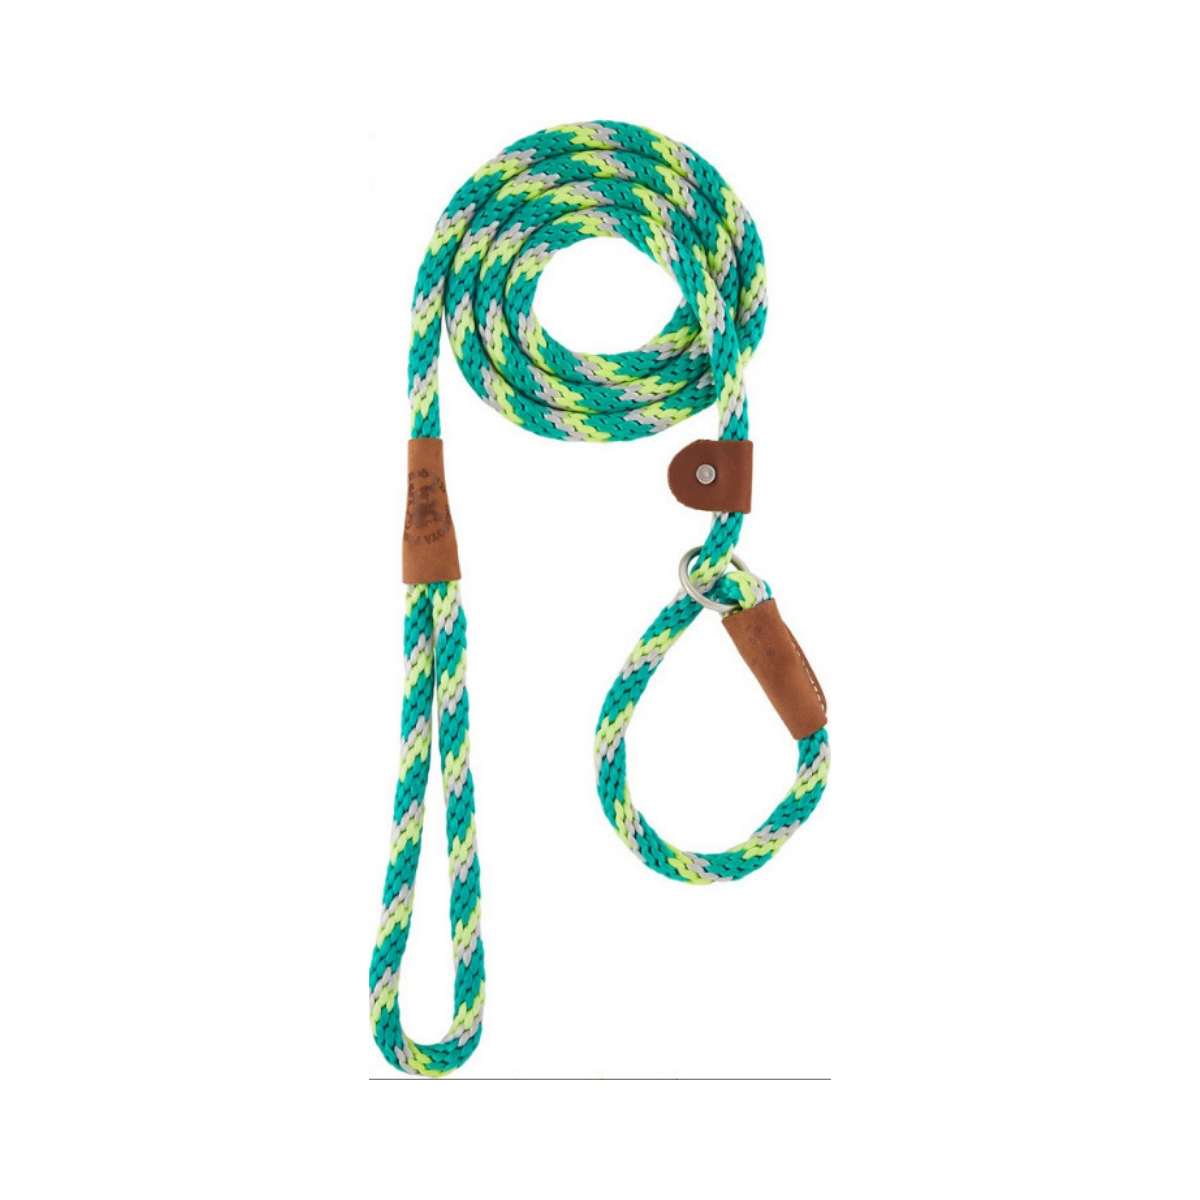 Strong Enough for Medium Large Dogs Pulling Turquoise VIVAGLORY 3FT Short Rope Dog Lead Leash for Easy Control with Soft Padded Handle and Reflective Threads